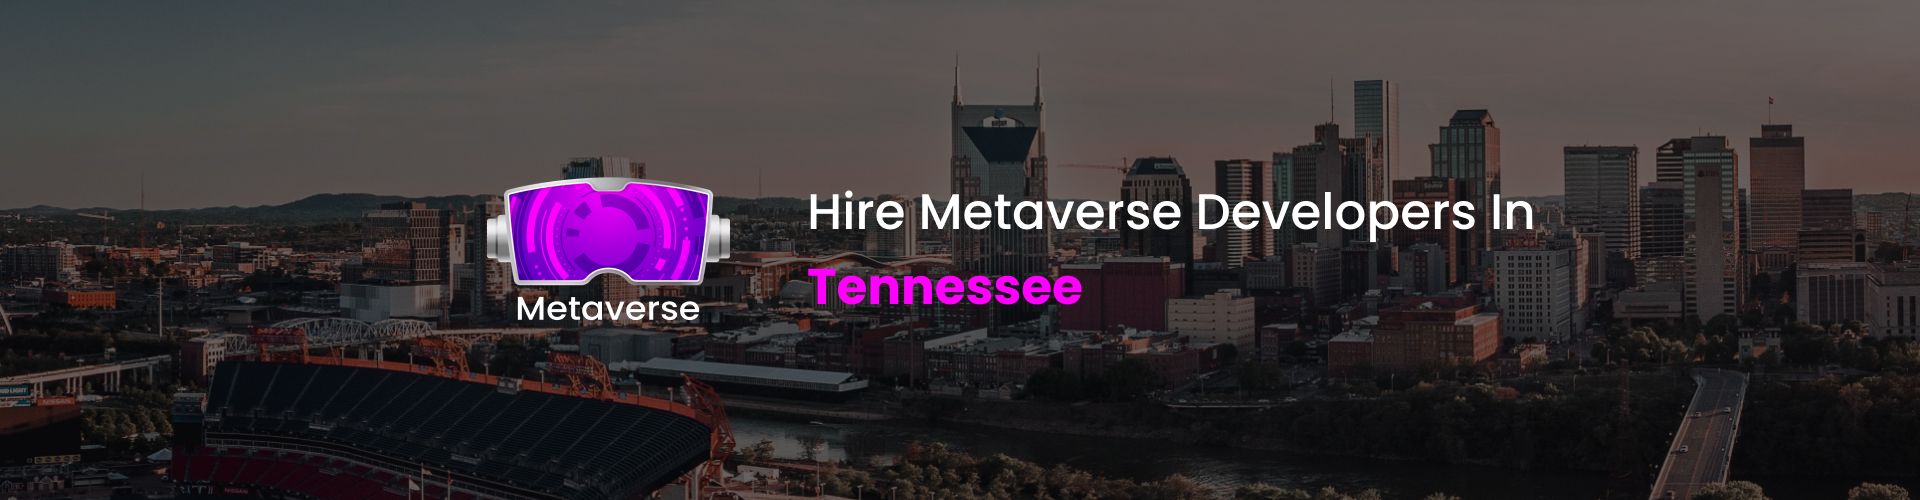 hire metaverse developers in tennesssee